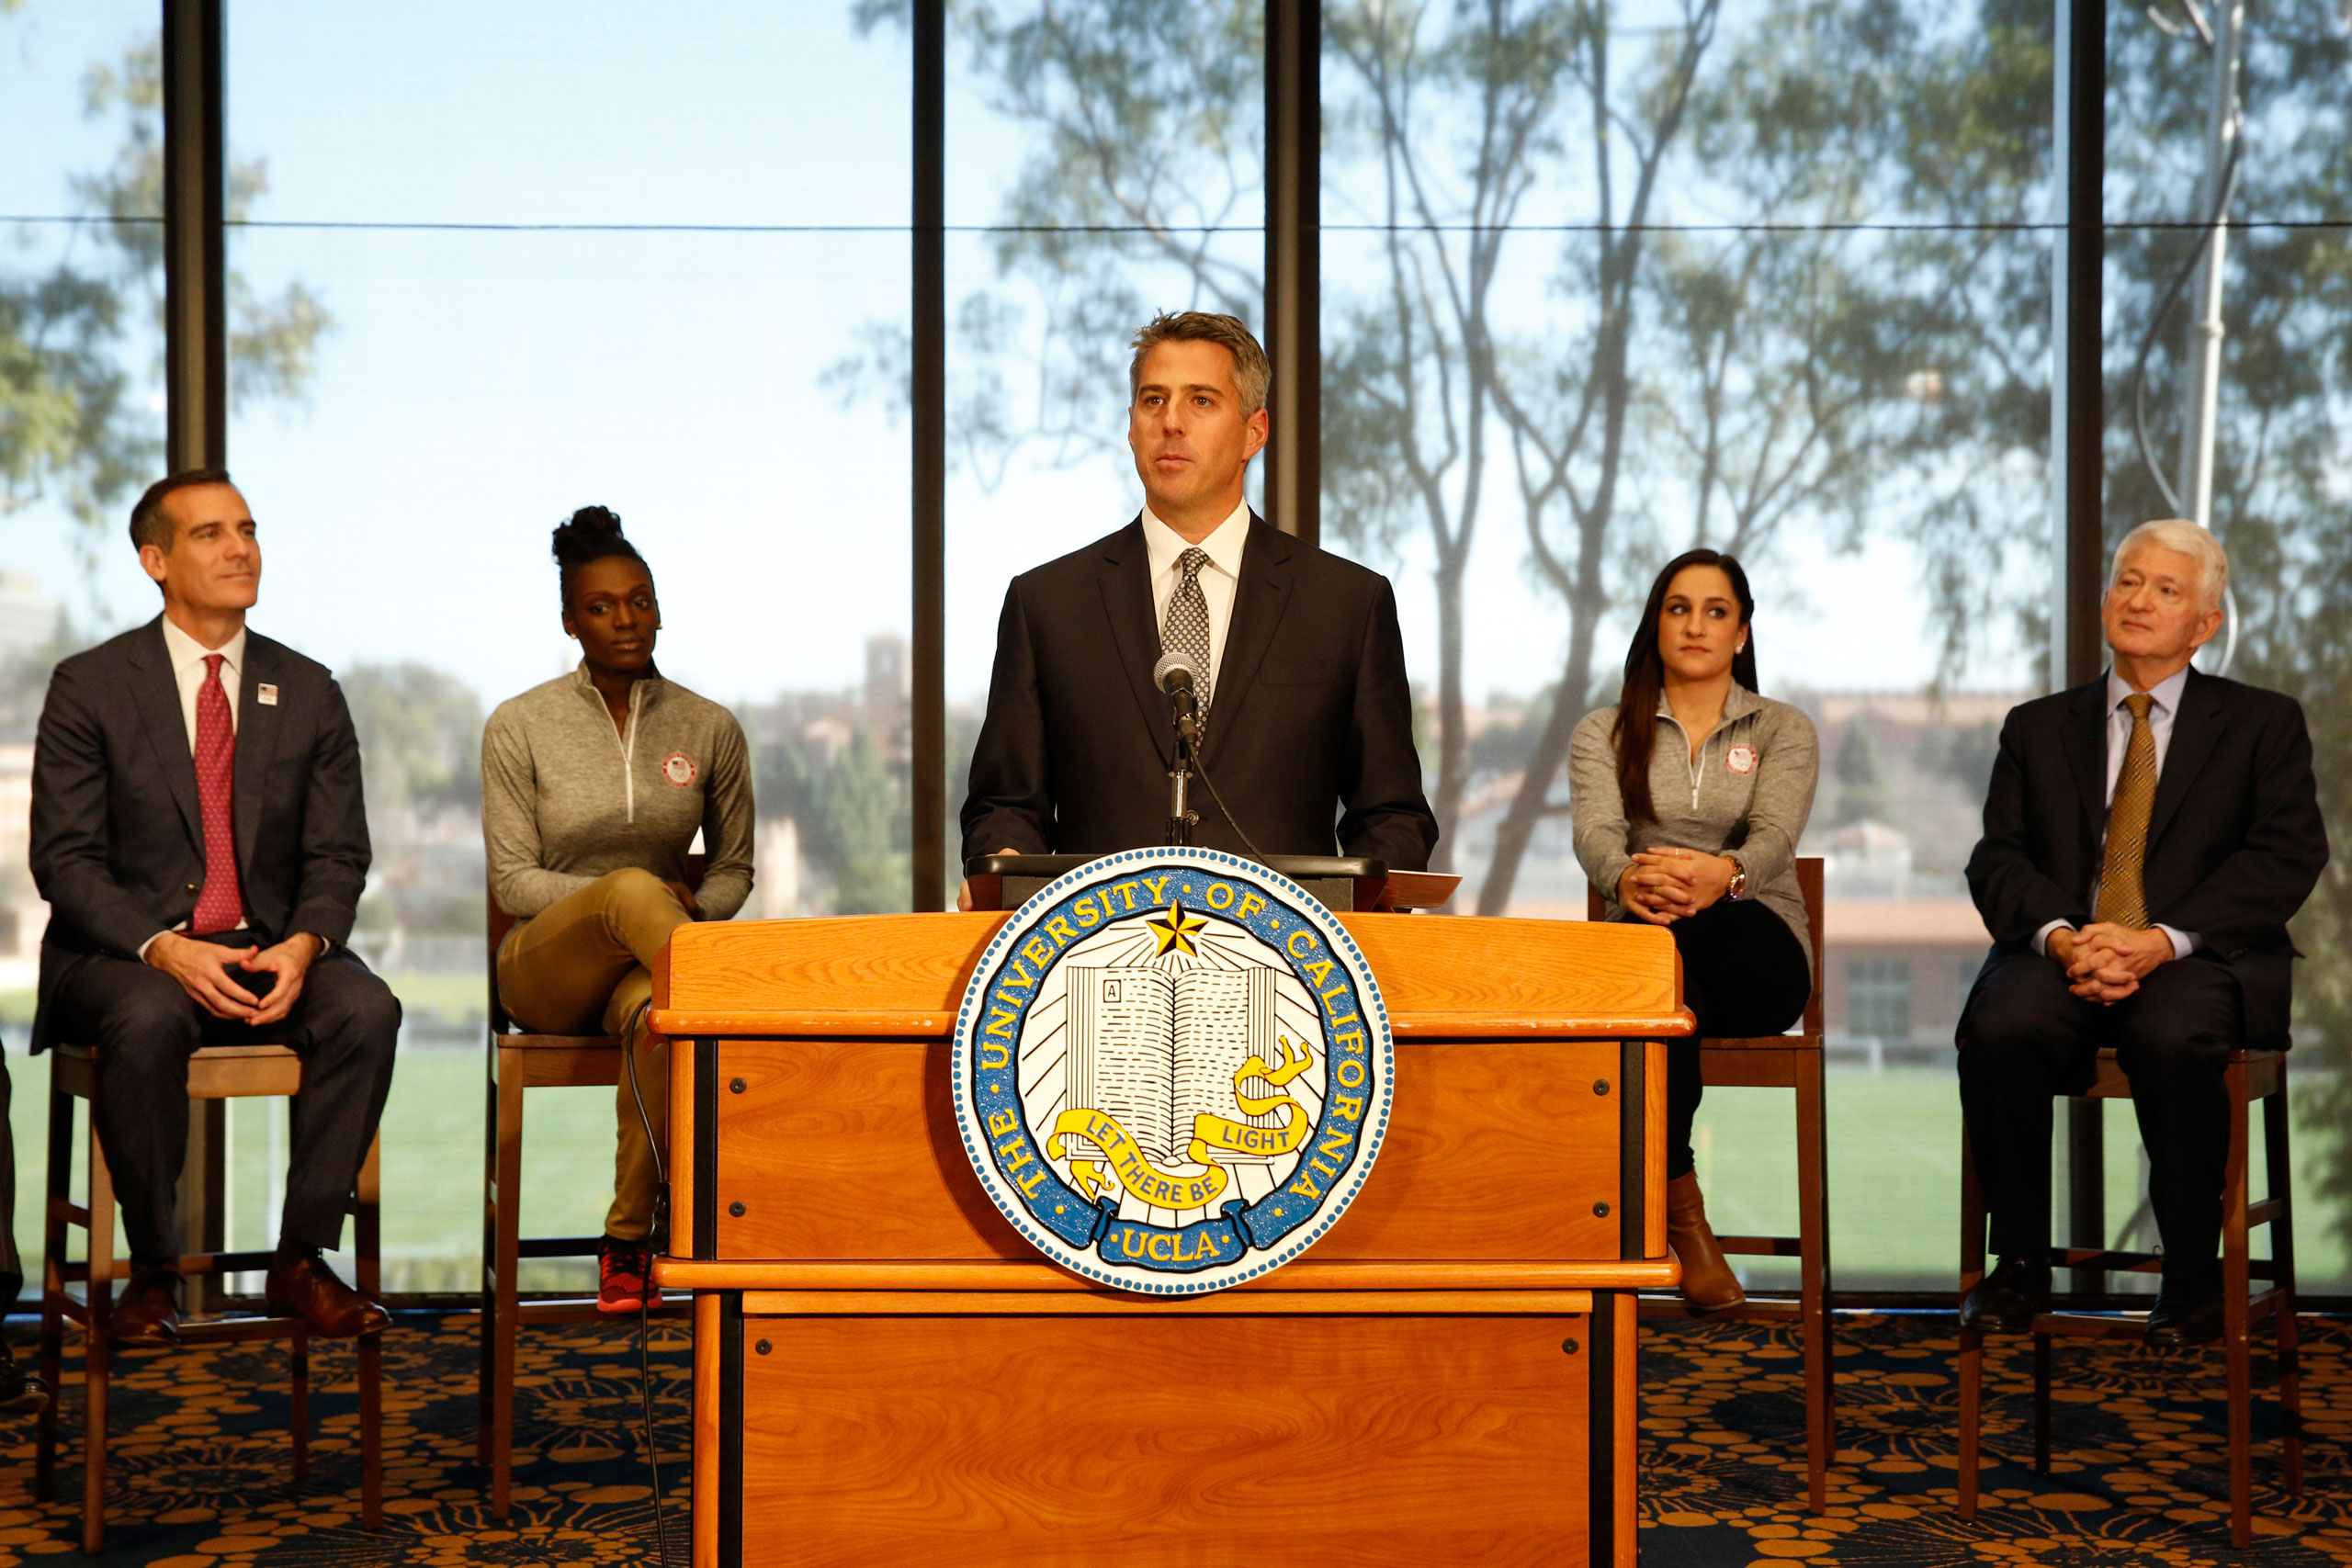 Garcetti, Nelson, Wieber, and Chancellor Block sit on stage, focusing on Wasserman as he speaks from behind a podium in the foreground.